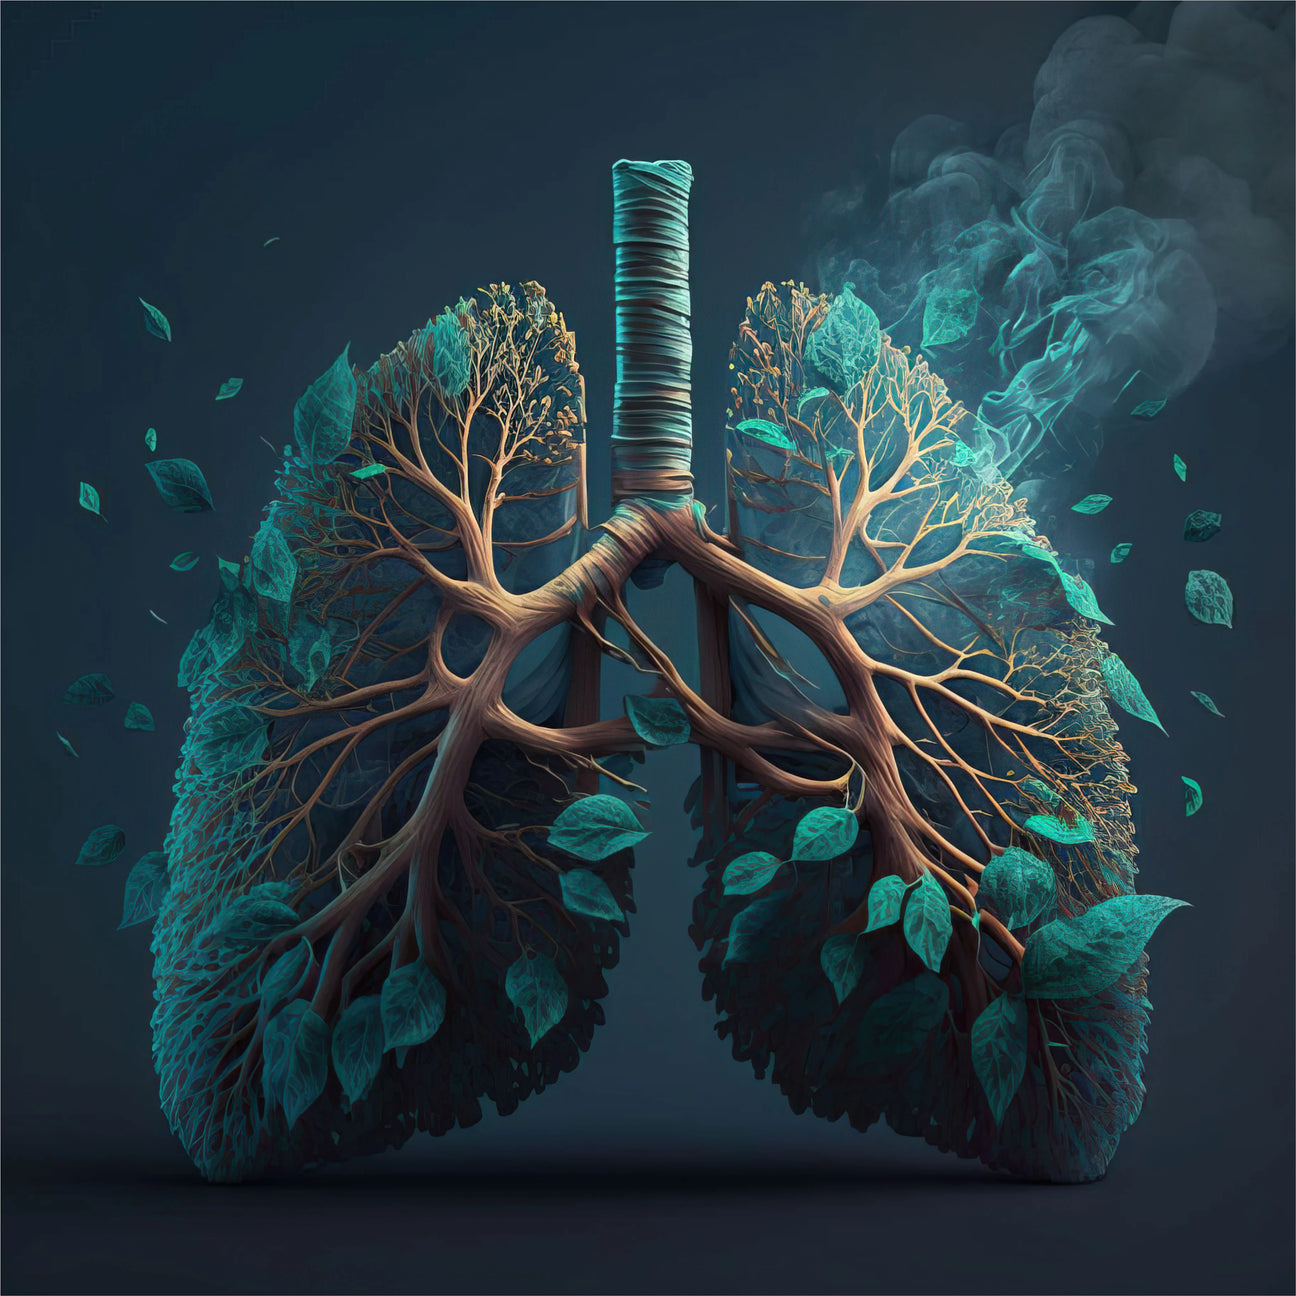 Lungs Health